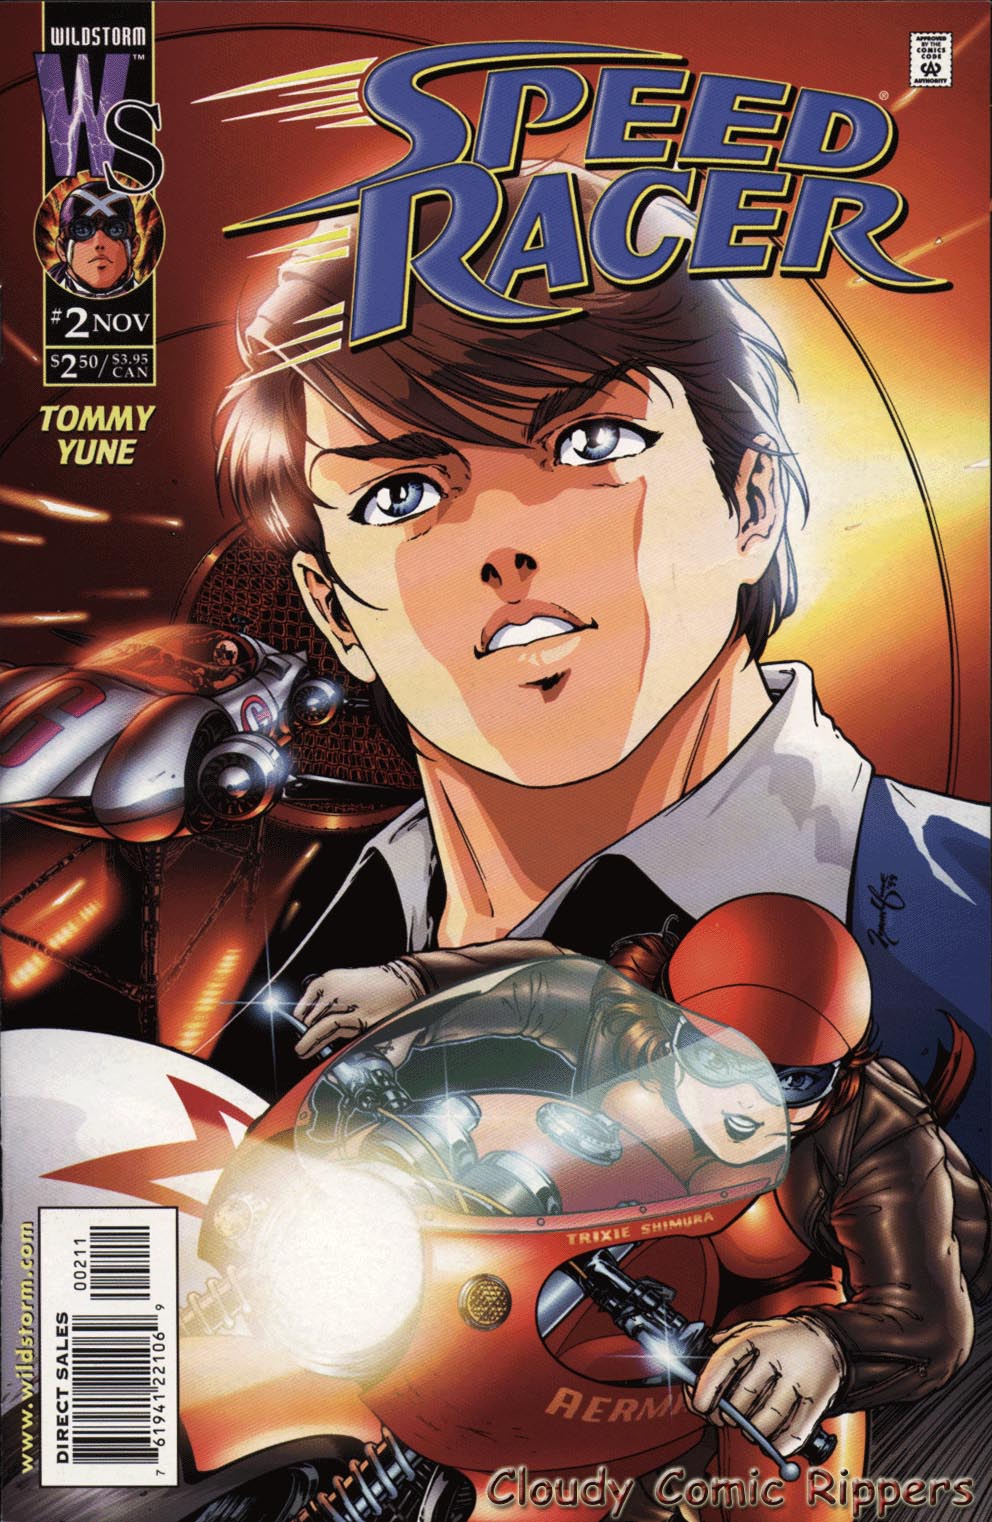 Speed Racer Issue 2 | Read Speed Racer Issue 2 comic online in high  quality. Read Full Comic online for free - Read comics online in high  quality .| READ COMIC ONLINE